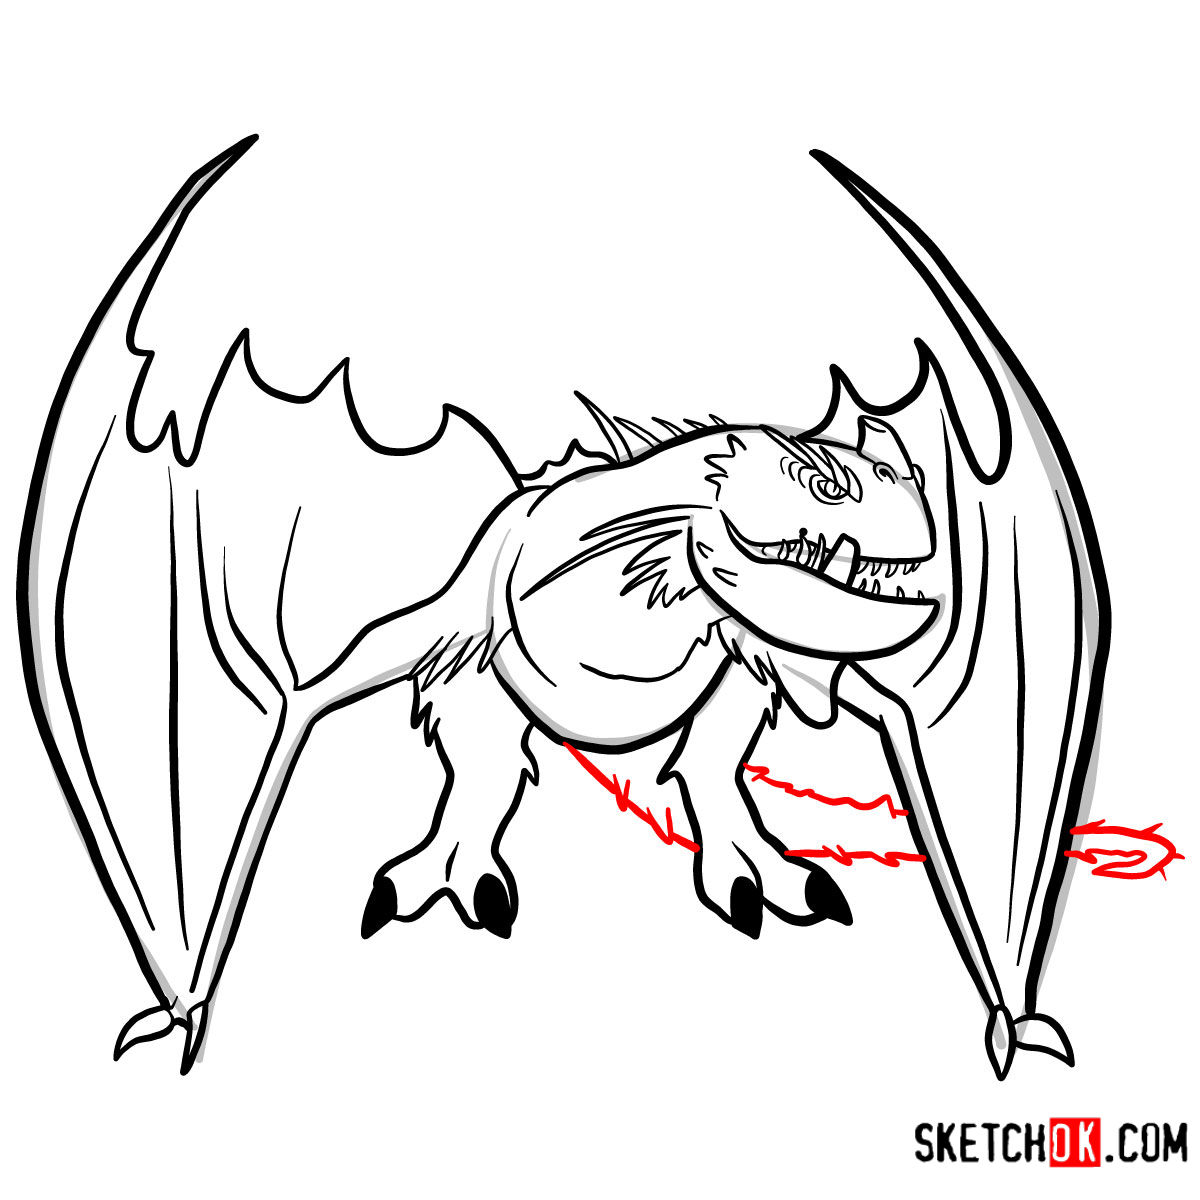 How to draw The Snow Wraith Dragon | How to Train Your Dragon - step 12